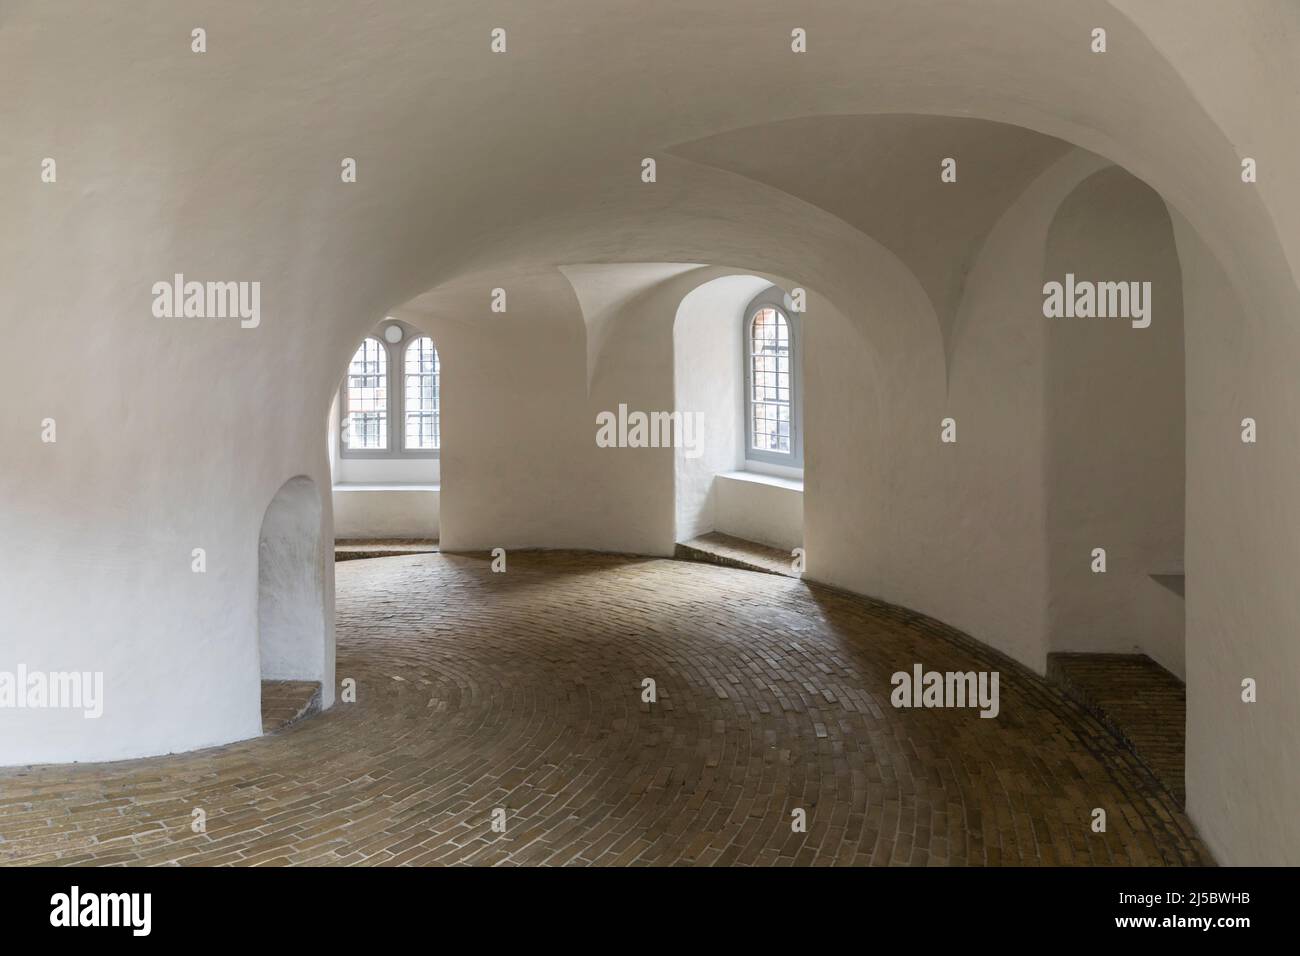 Interior of the 17th century Round Tower or Rundetaarn in Copenhagen, Denmark. Sloping spiral walkway formerly used by horse-drawn wagons. Stock Photo